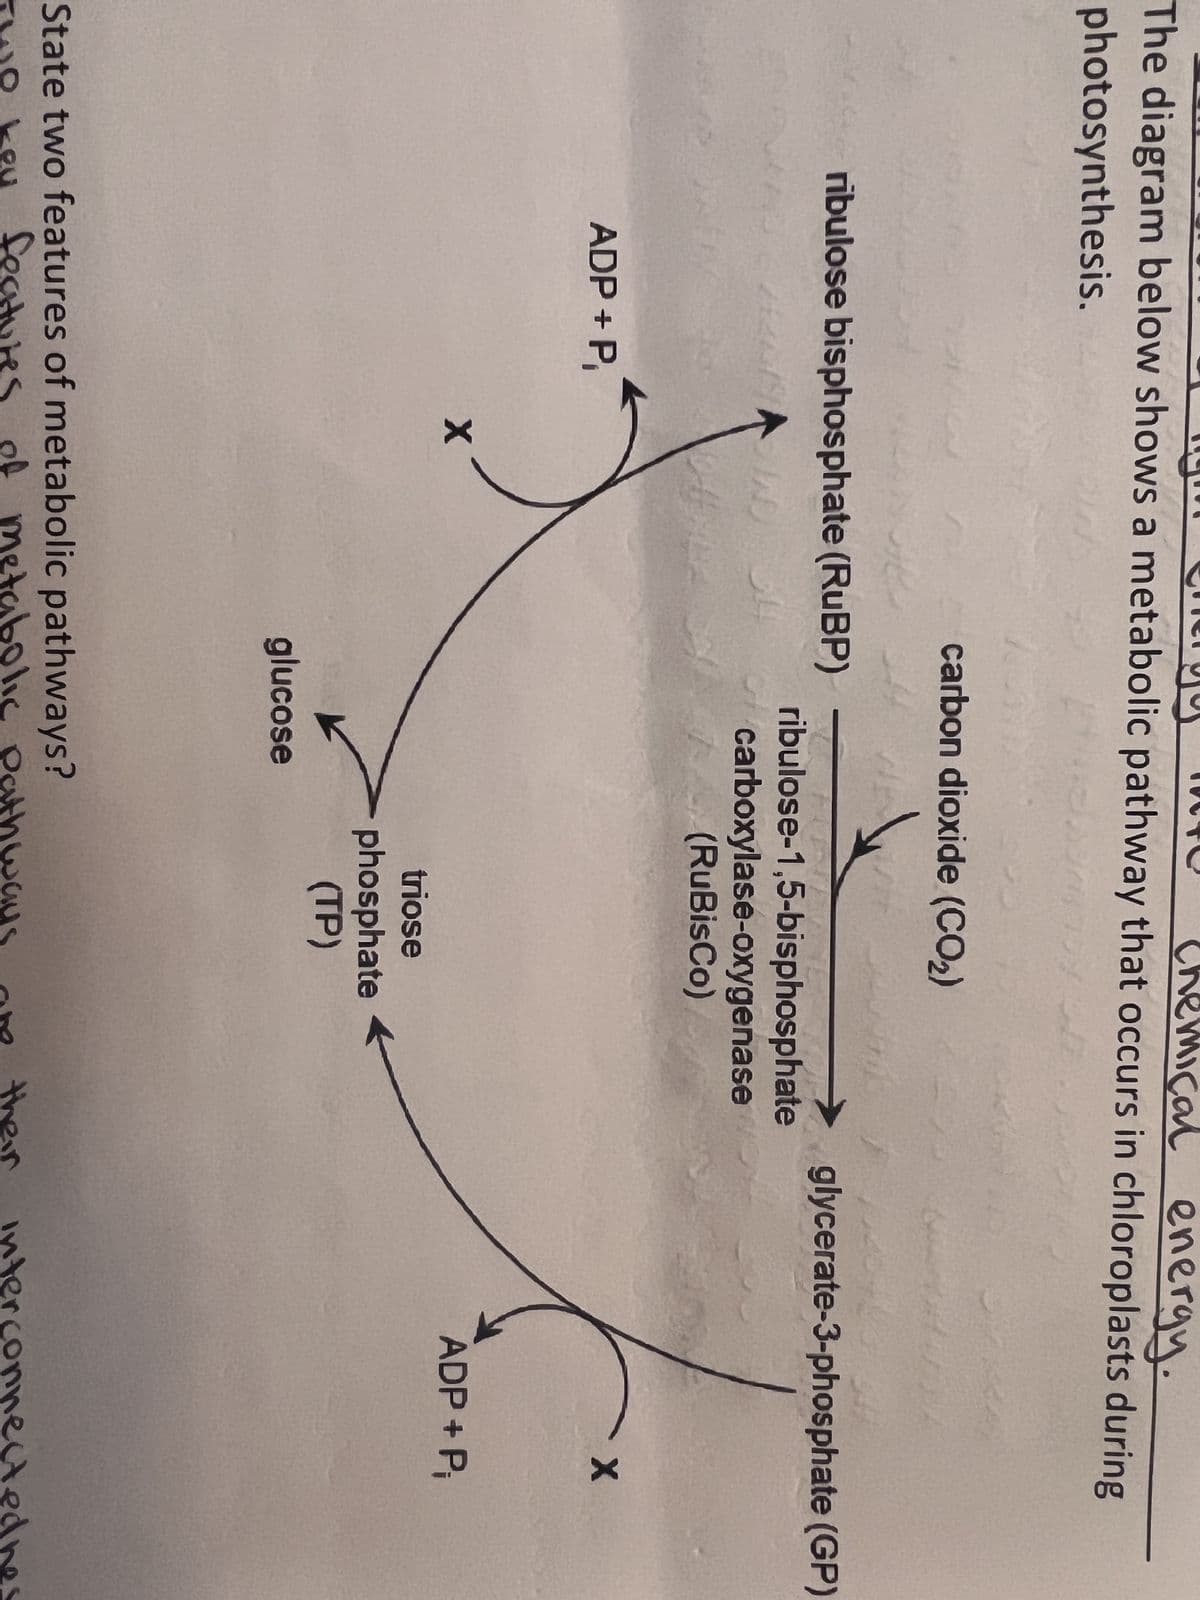 Chemical energy.
The diagram below shows a metabolic pathway that occurs in chloroplasts during
photosynthesis.
ribulose bisphosphate (RuBP)
ADP + P₁
carbon dioxide (CO₂)
1
X
HINEW
ribulose-1,5-bisphosphate
carboxylase-oxygenase
(RuBisCo)
glucose
triose
phosphate
(TP)
State two features of metabolic pathways?
two key features of metabolic pathways
glycerate-3-phosphate (GP)
are their
-X
ADP + P₁
interconnectedne